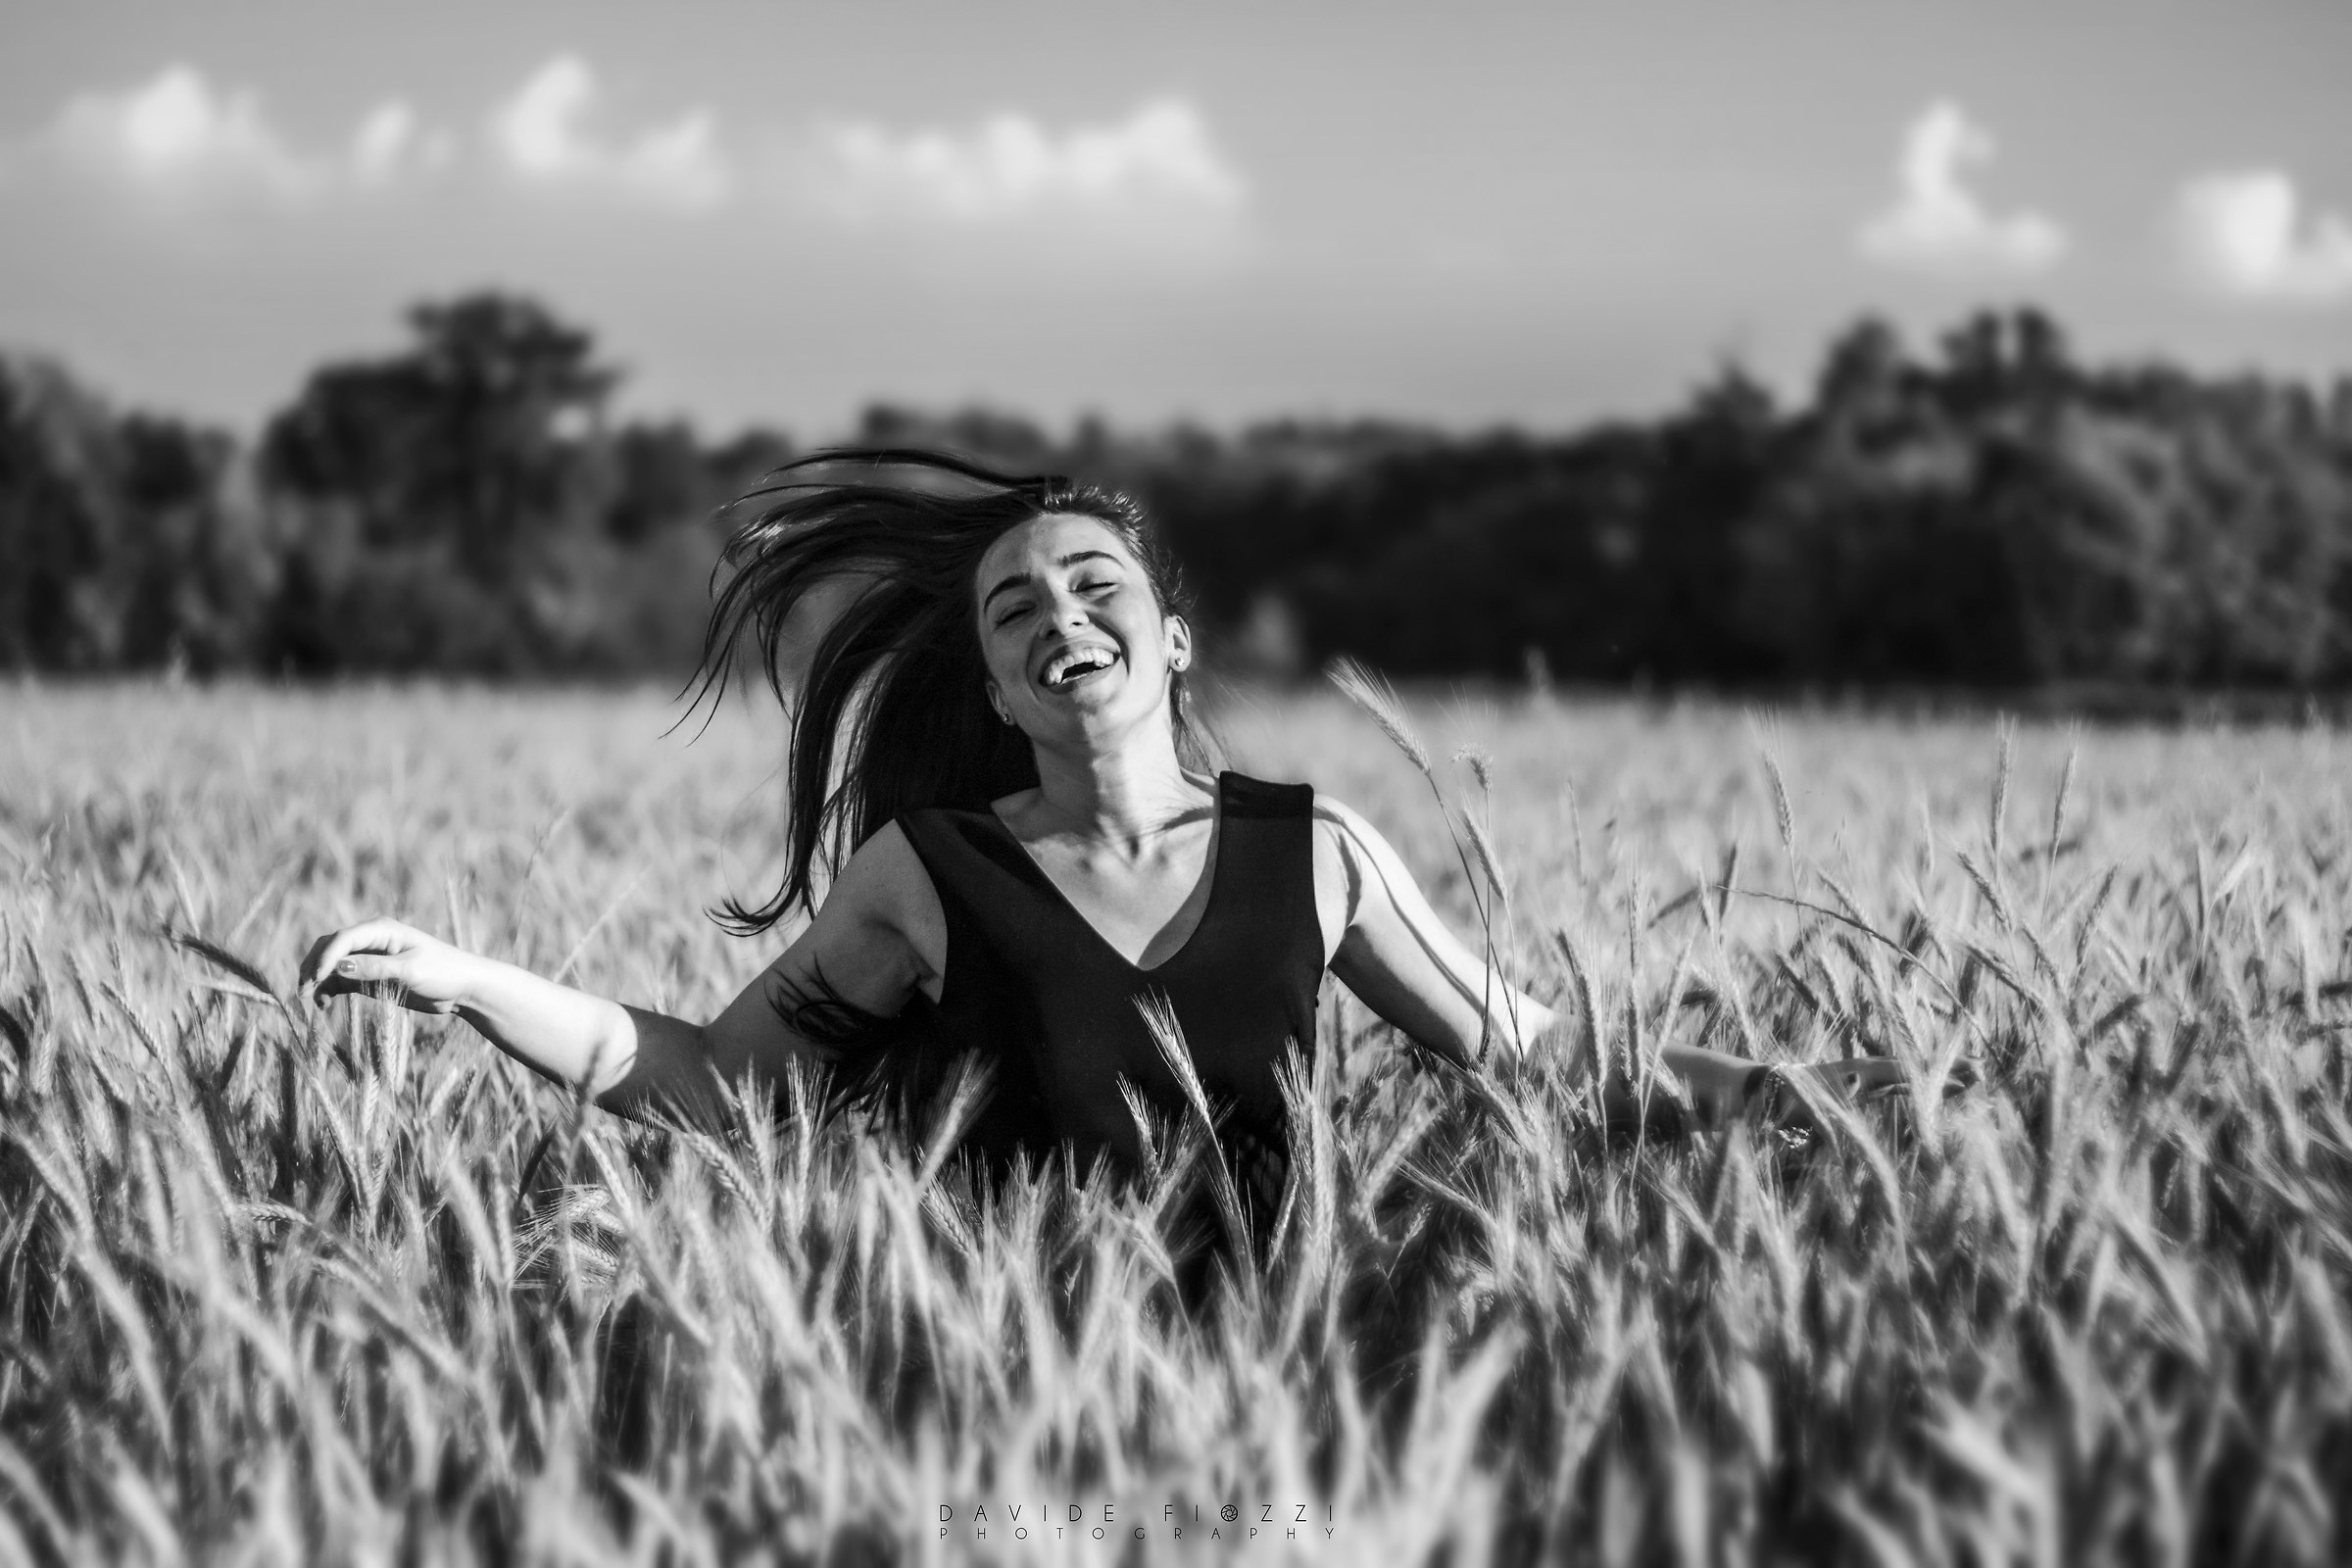 Smiled in a wheat field...